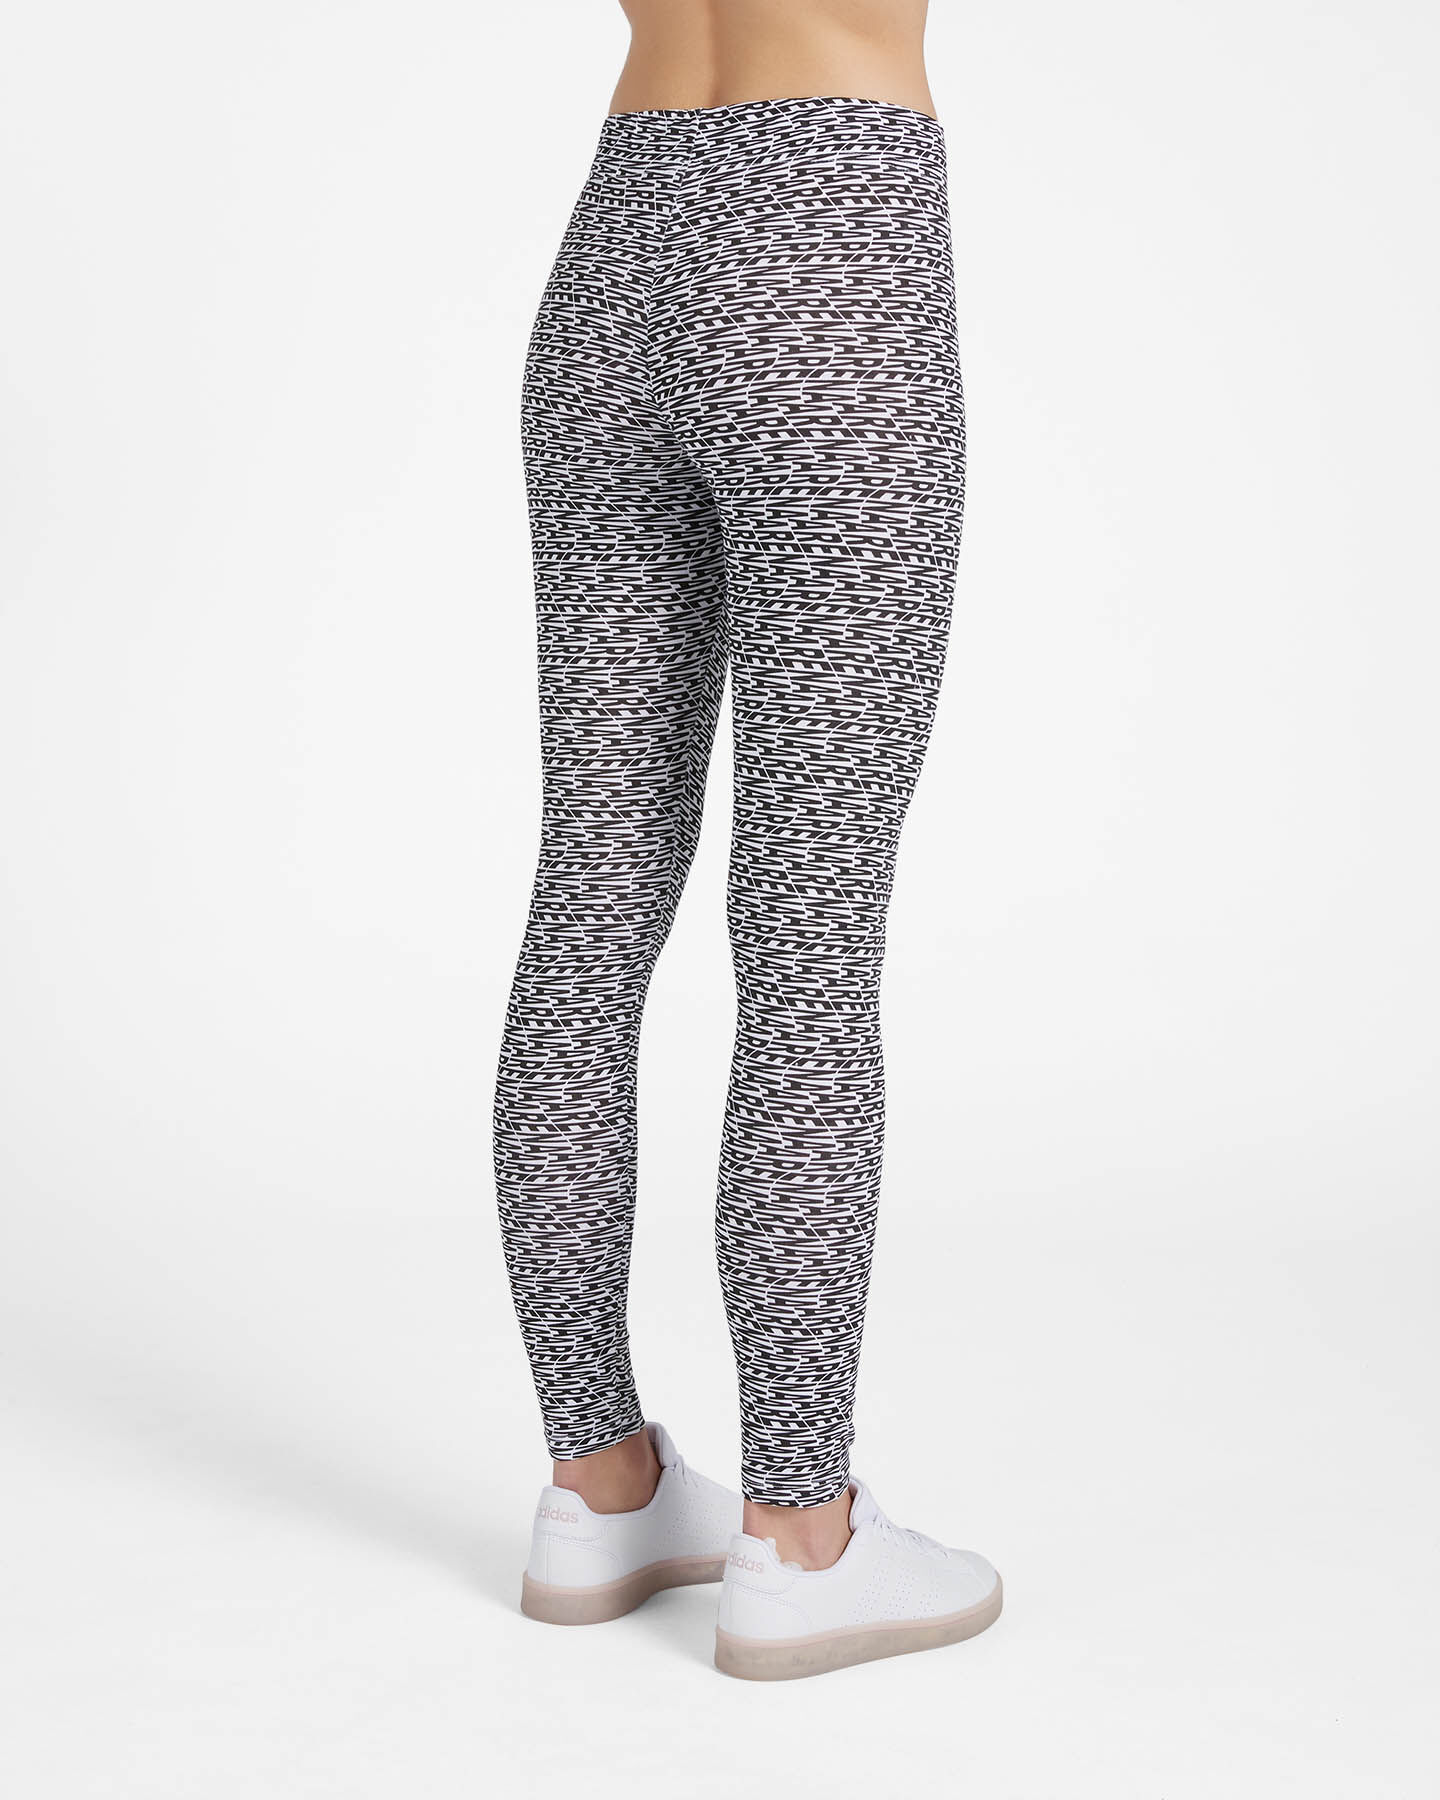  Leggings ARENA JSTRETCH AOP W S4087513|001/AOP|XS scatto 1